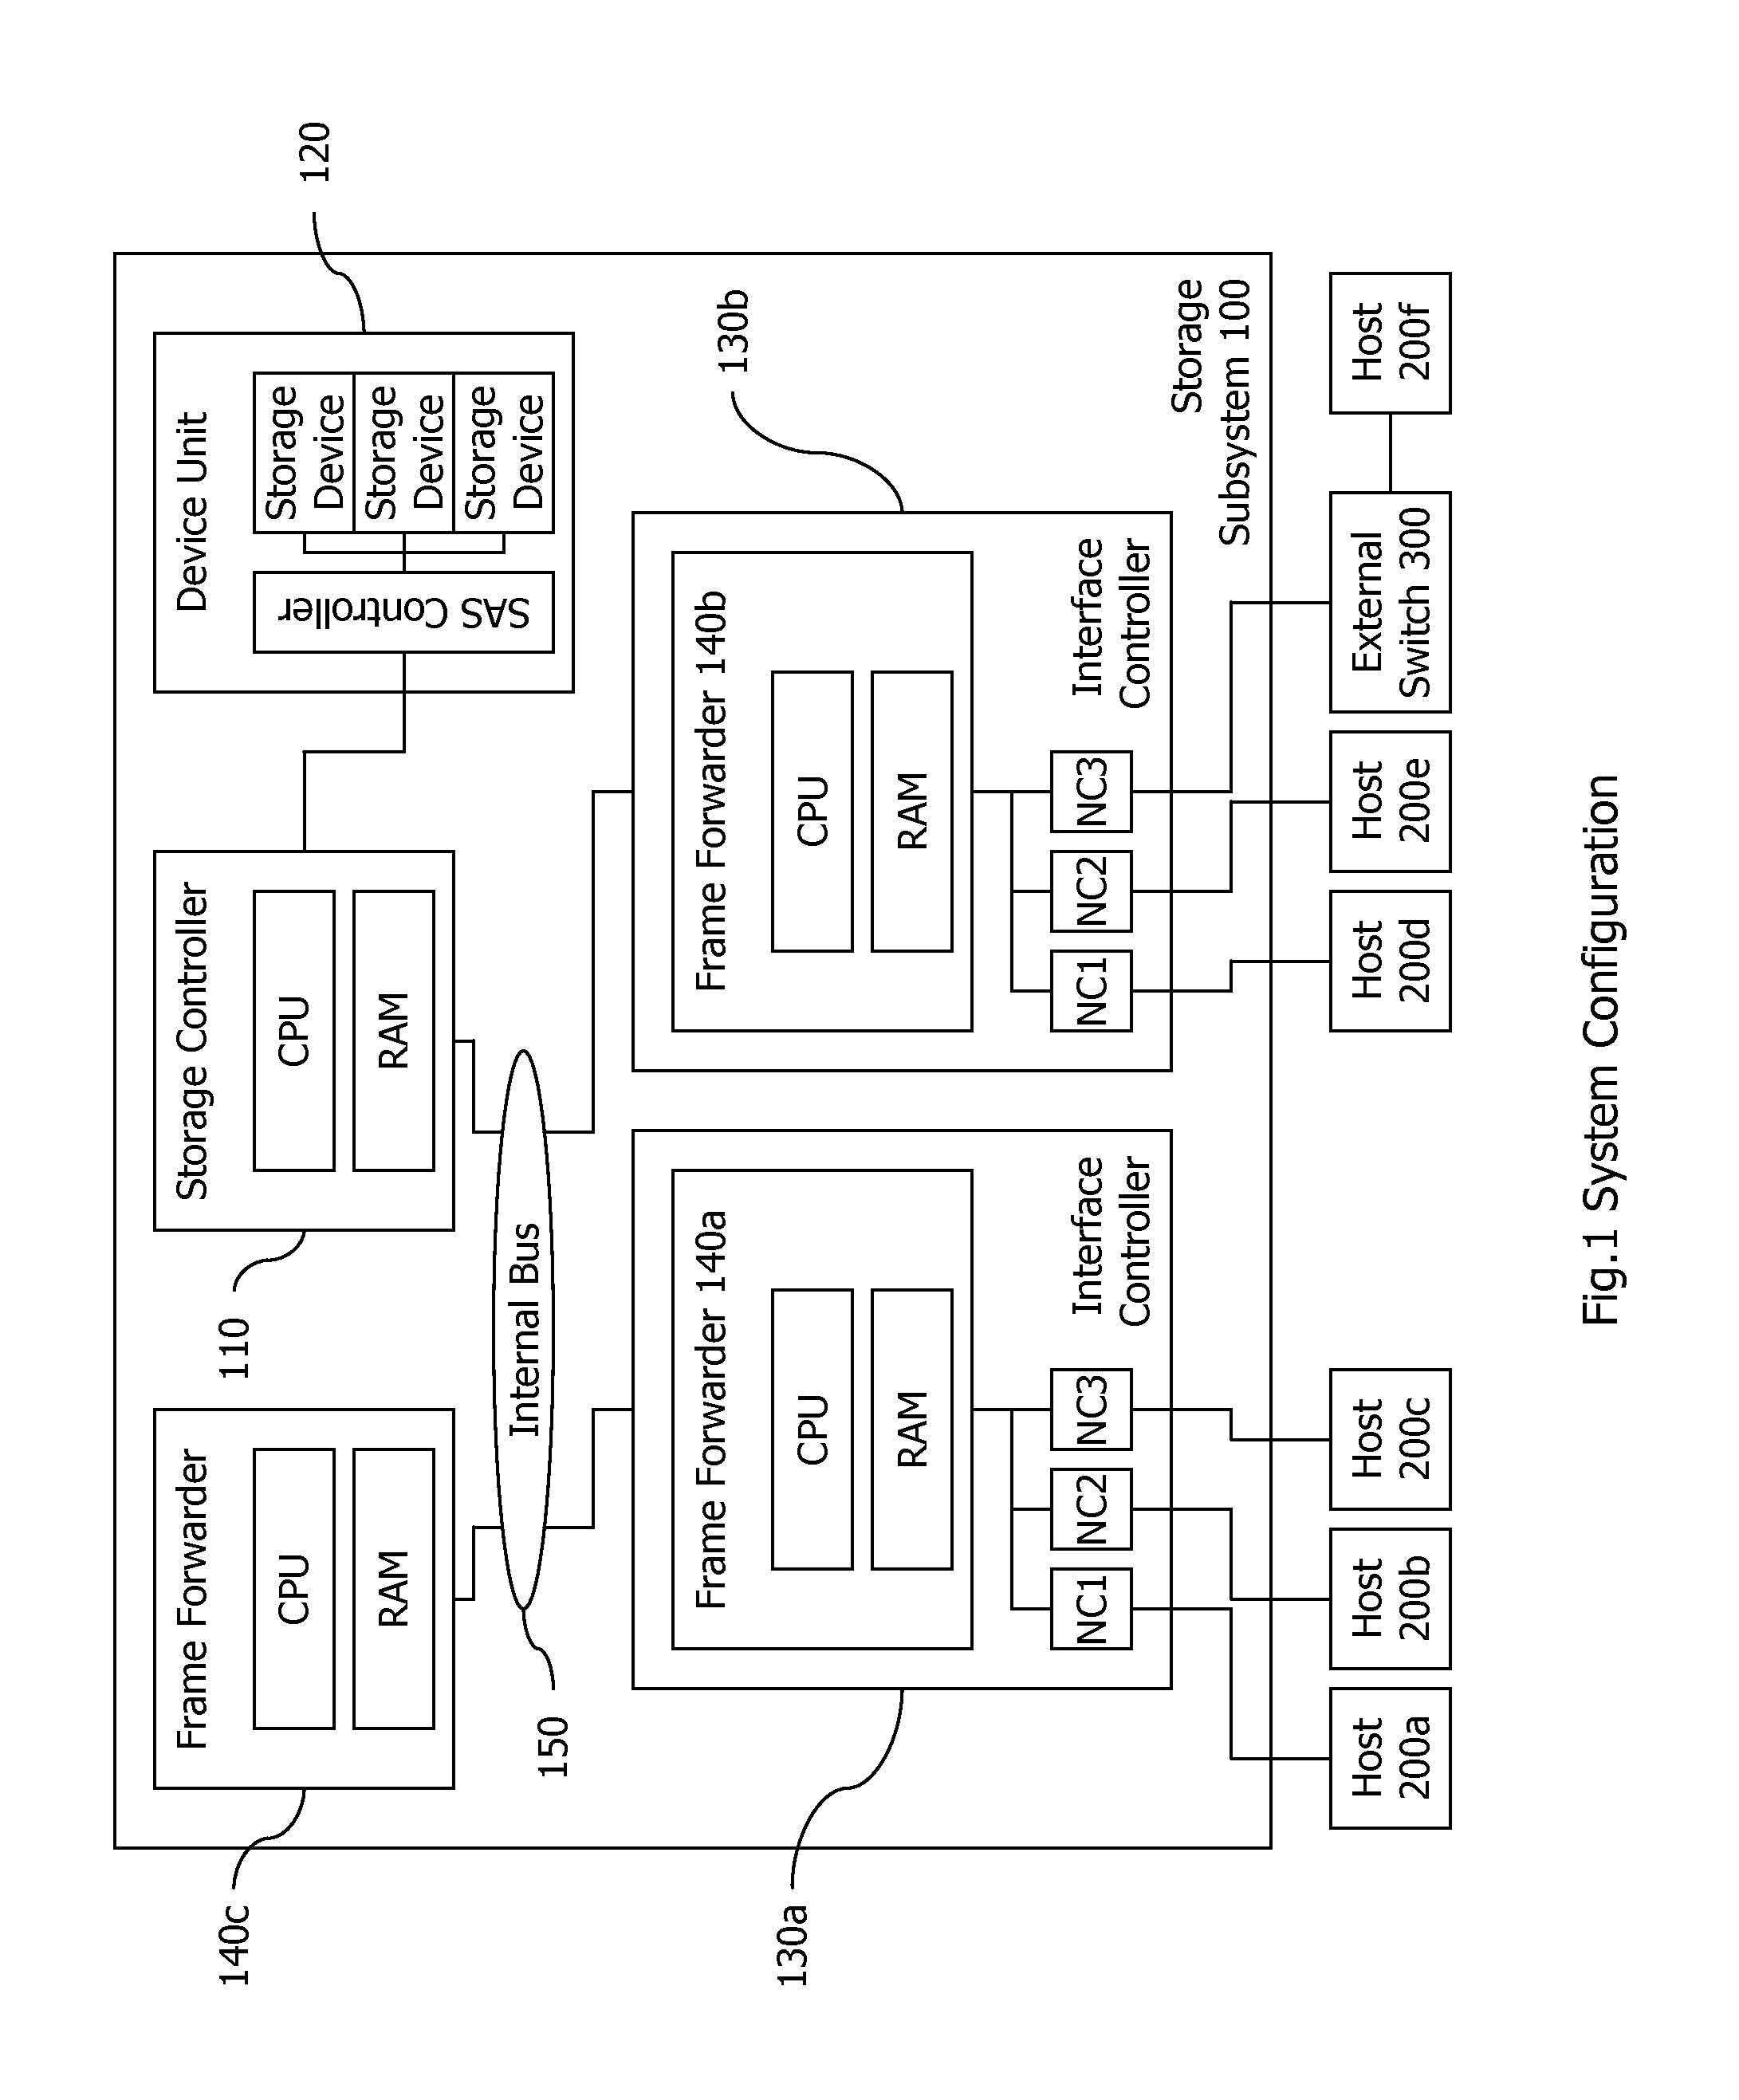 Method and apparatus of storage array with frame forwarding capability